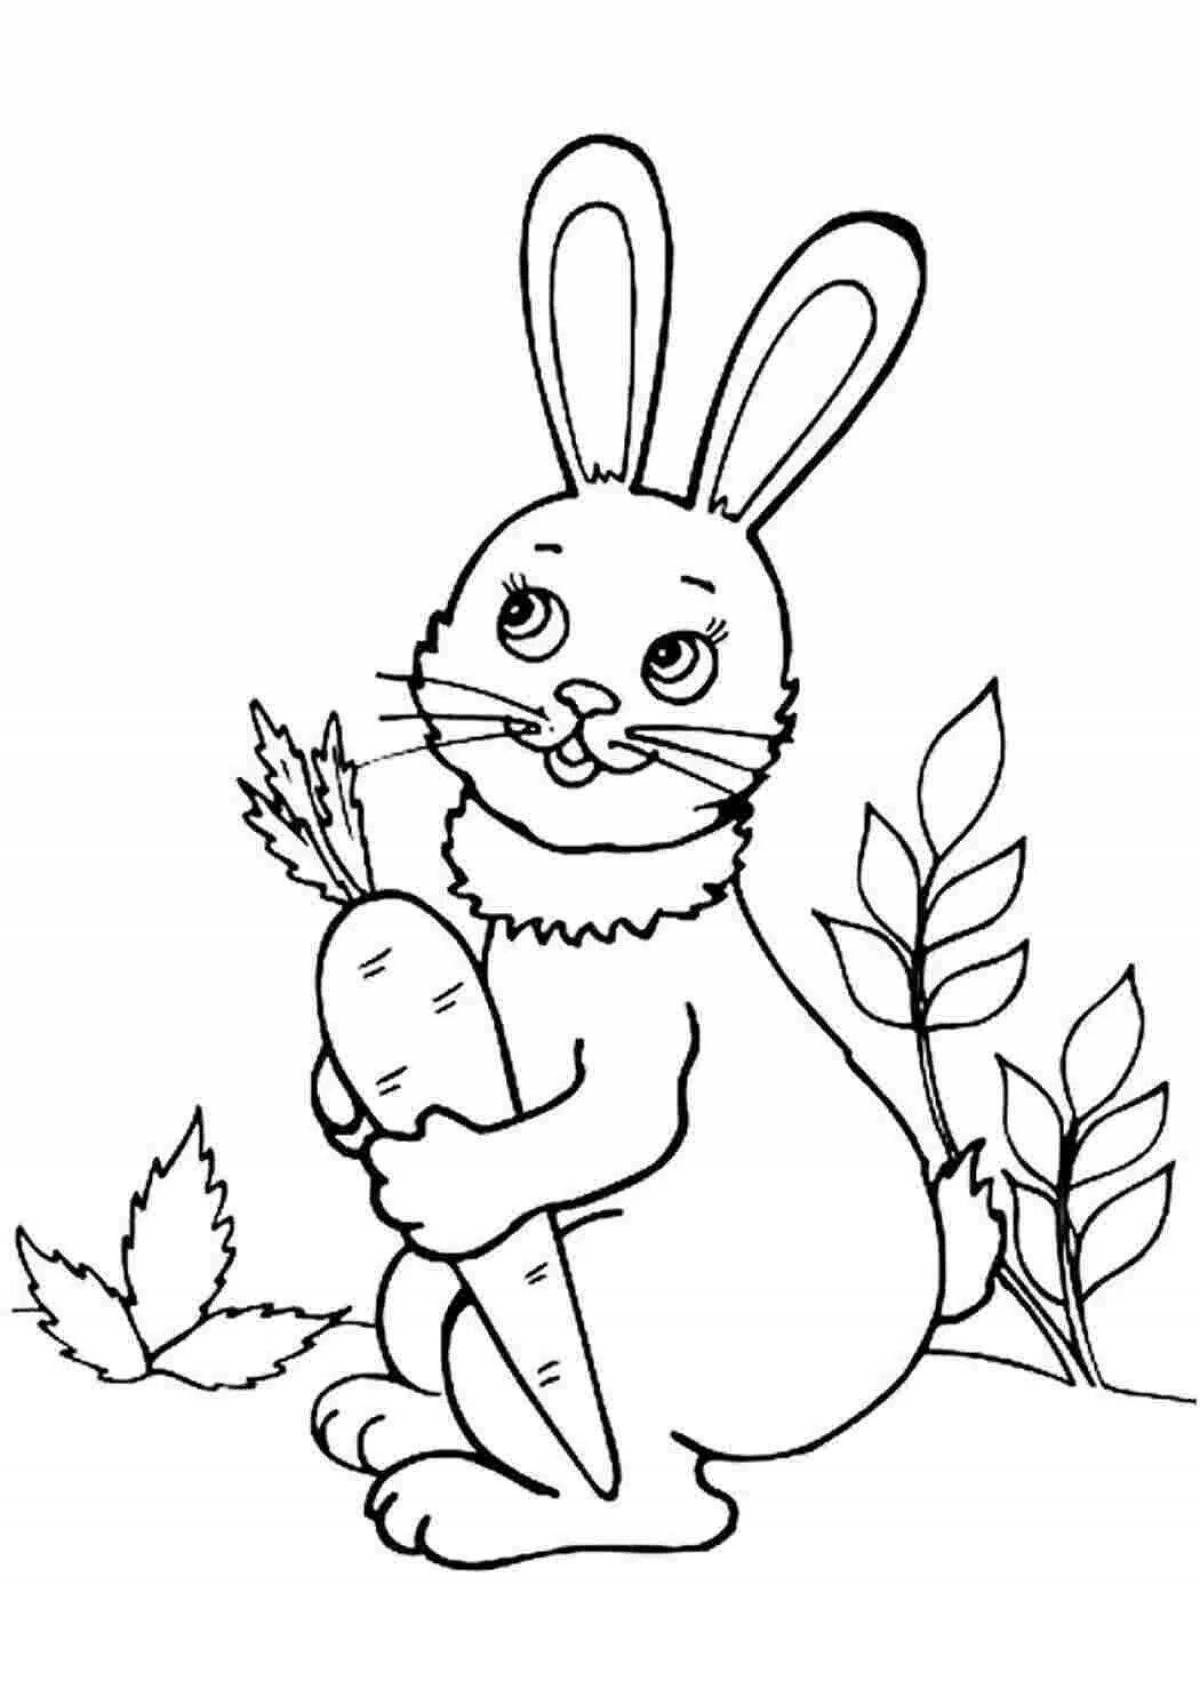 Crazy rabbit and carrot coloring book for kids